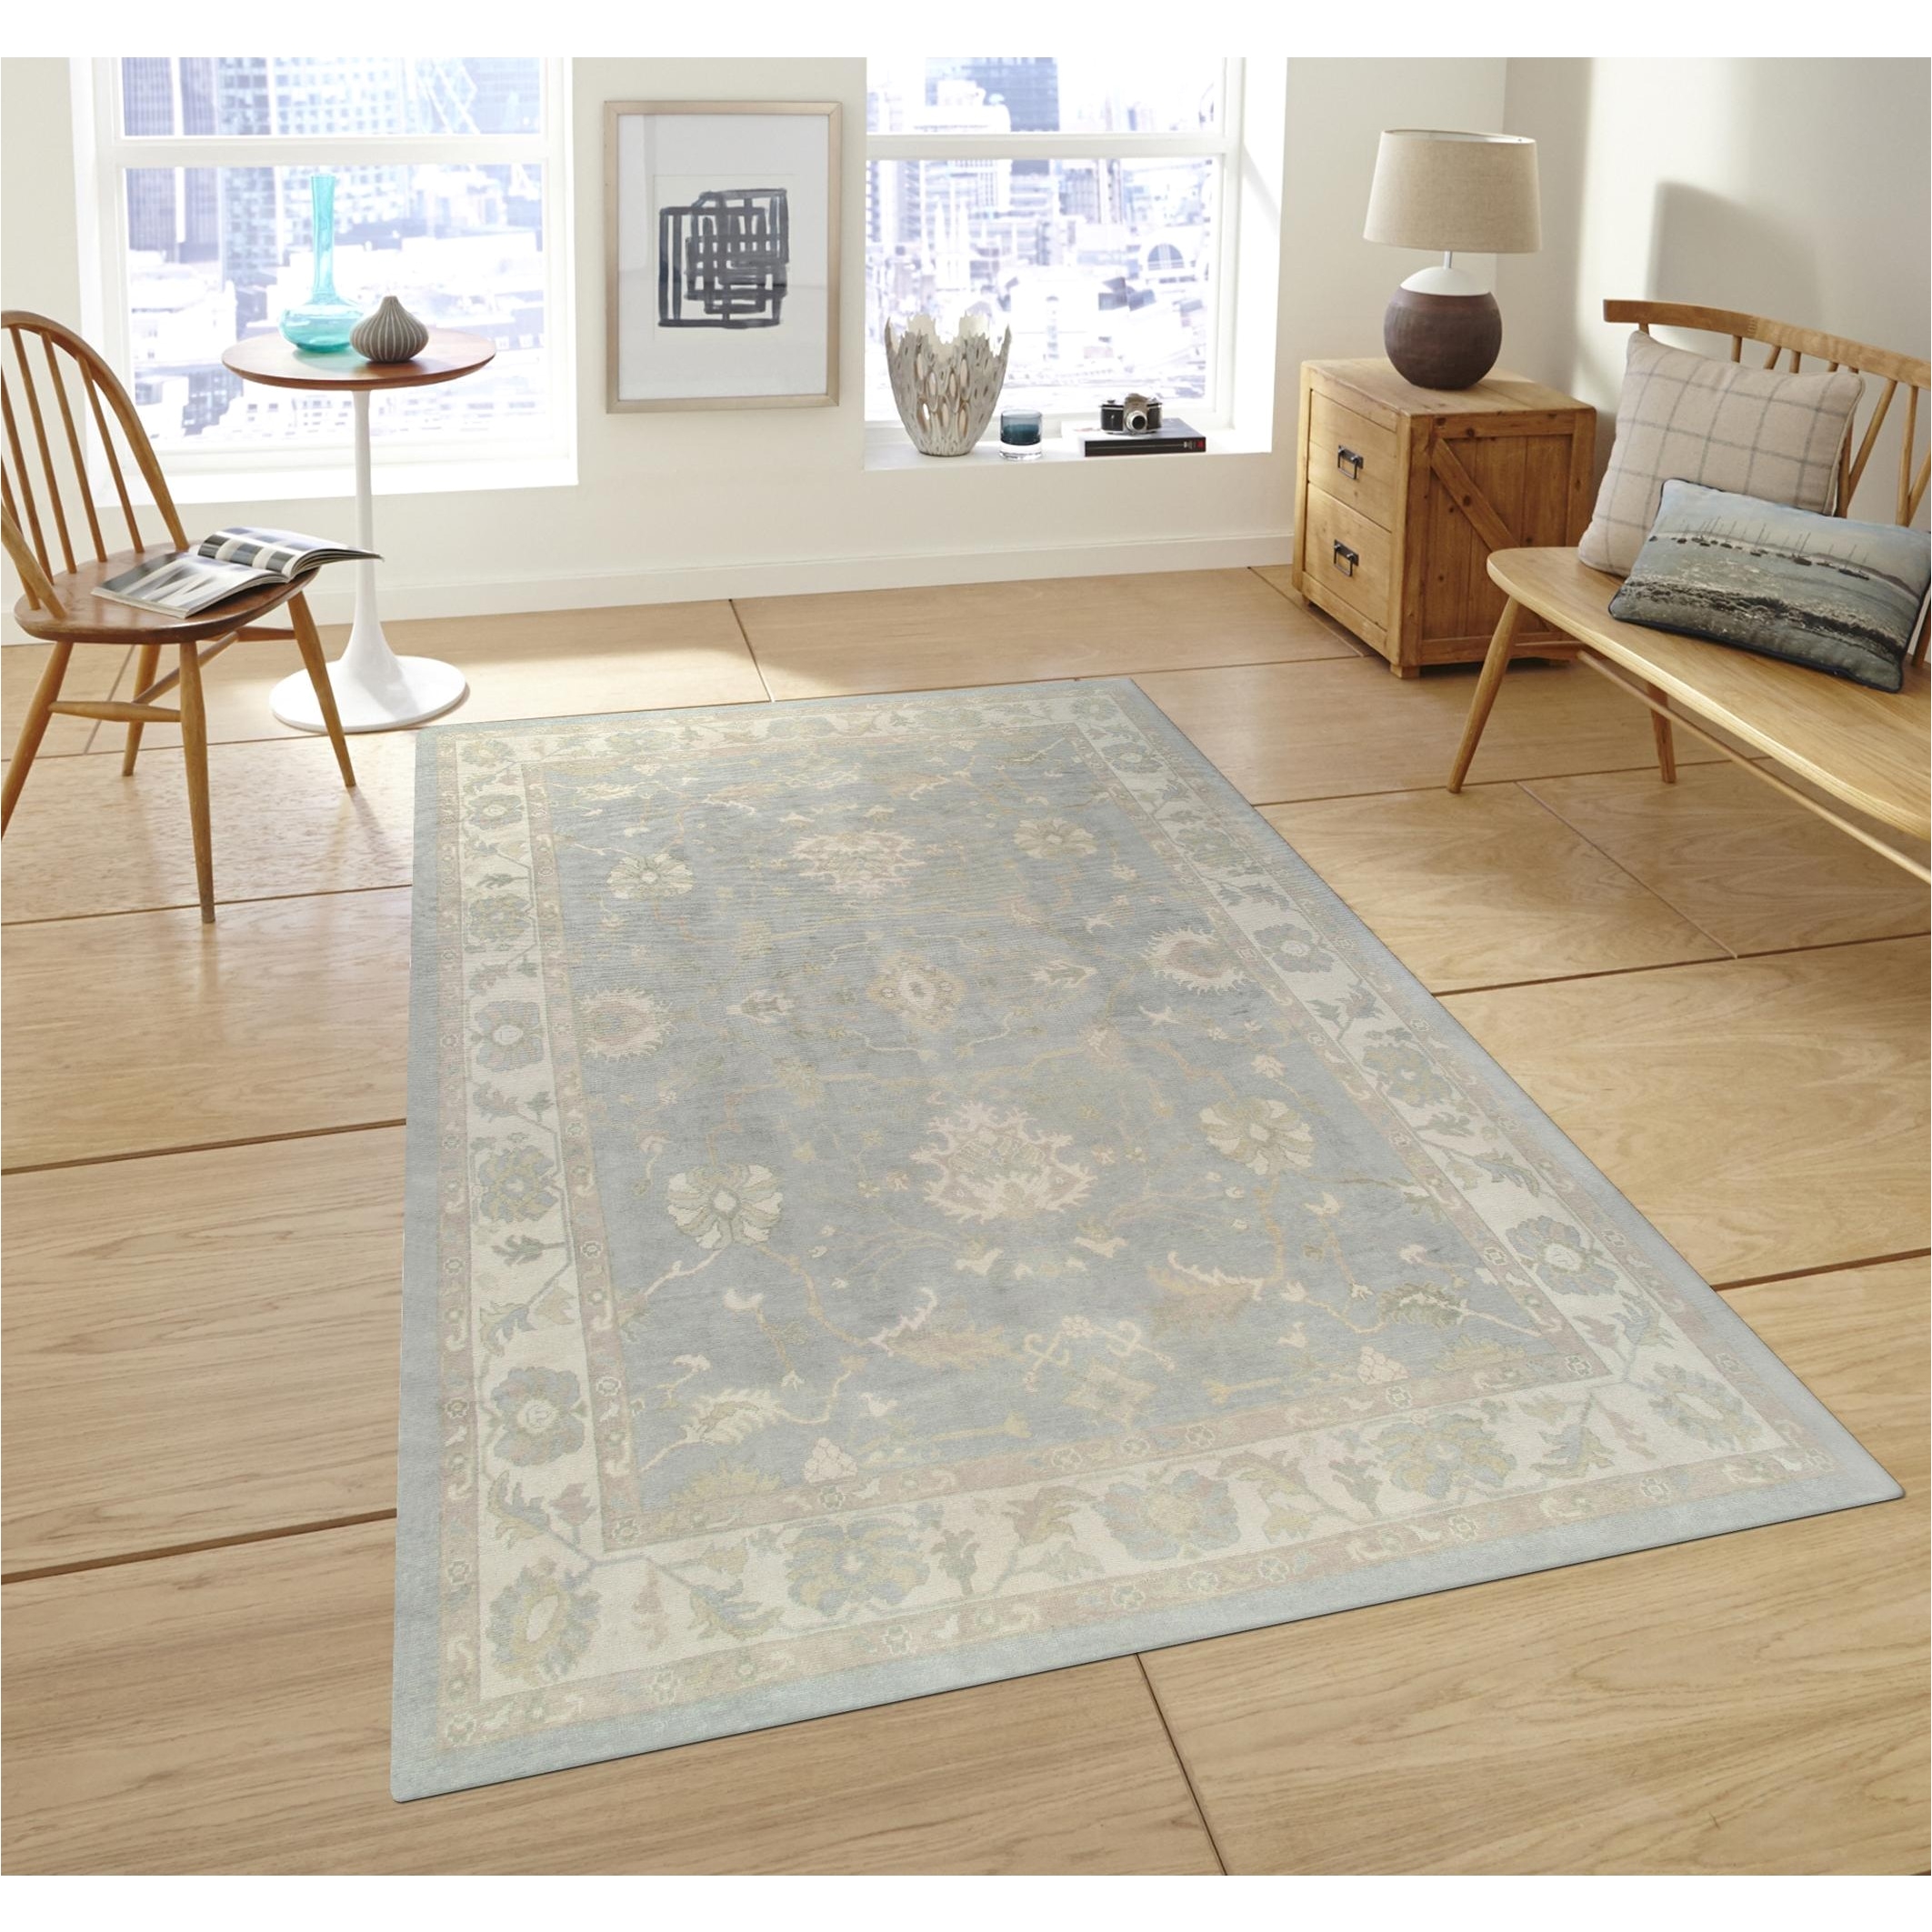 Cheap area Rugs Tampa Designer area Rug Awesome Large Size Of Coffee Rug Designer area